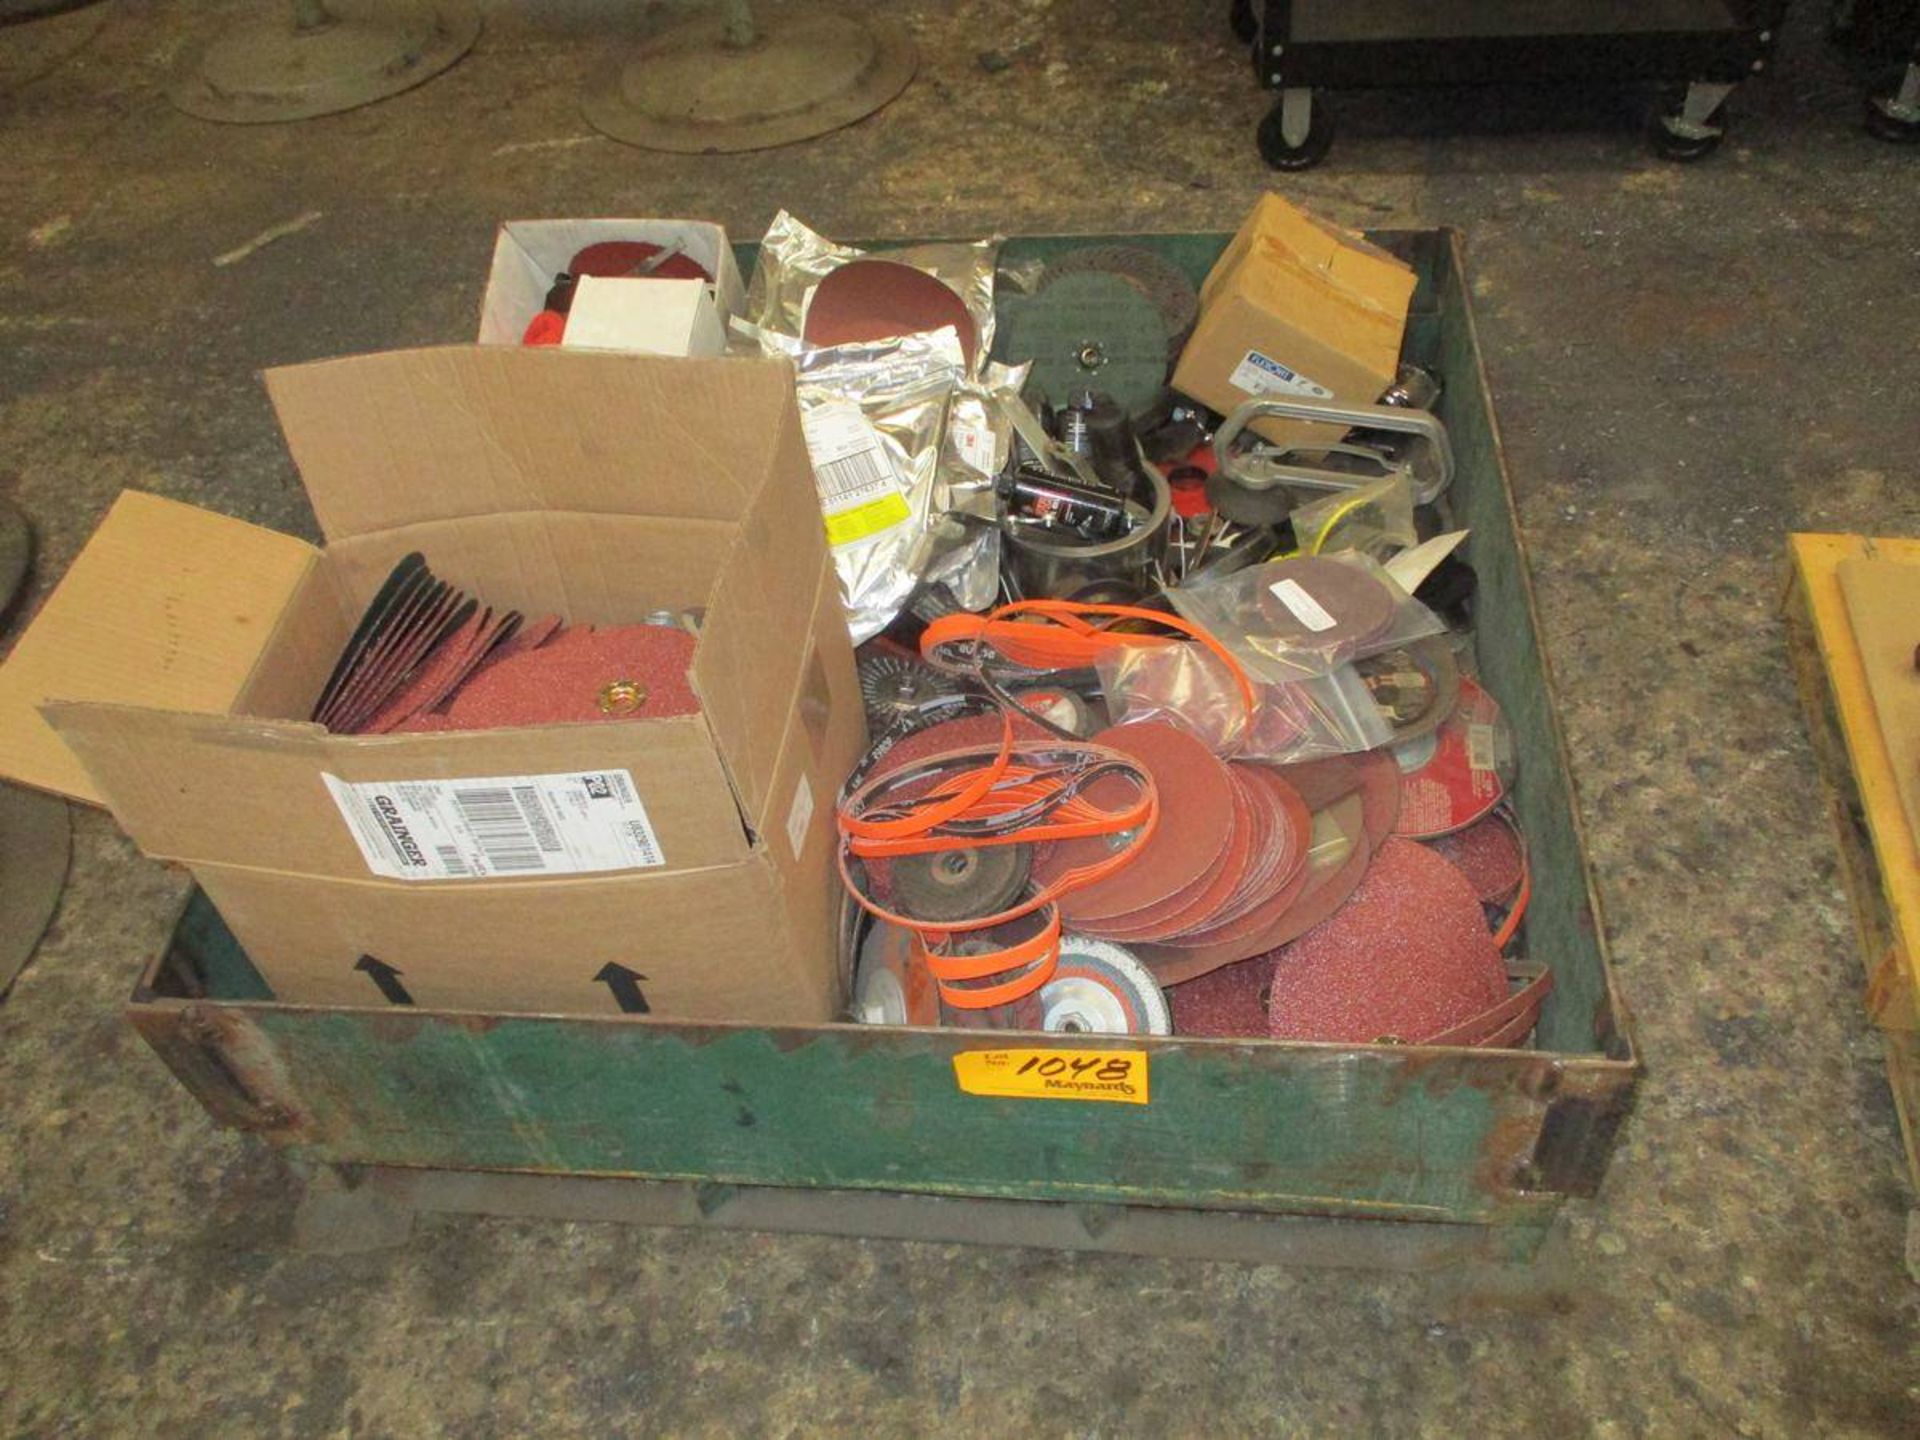 Steel Box with Large Qty Sanding Pads/Disks